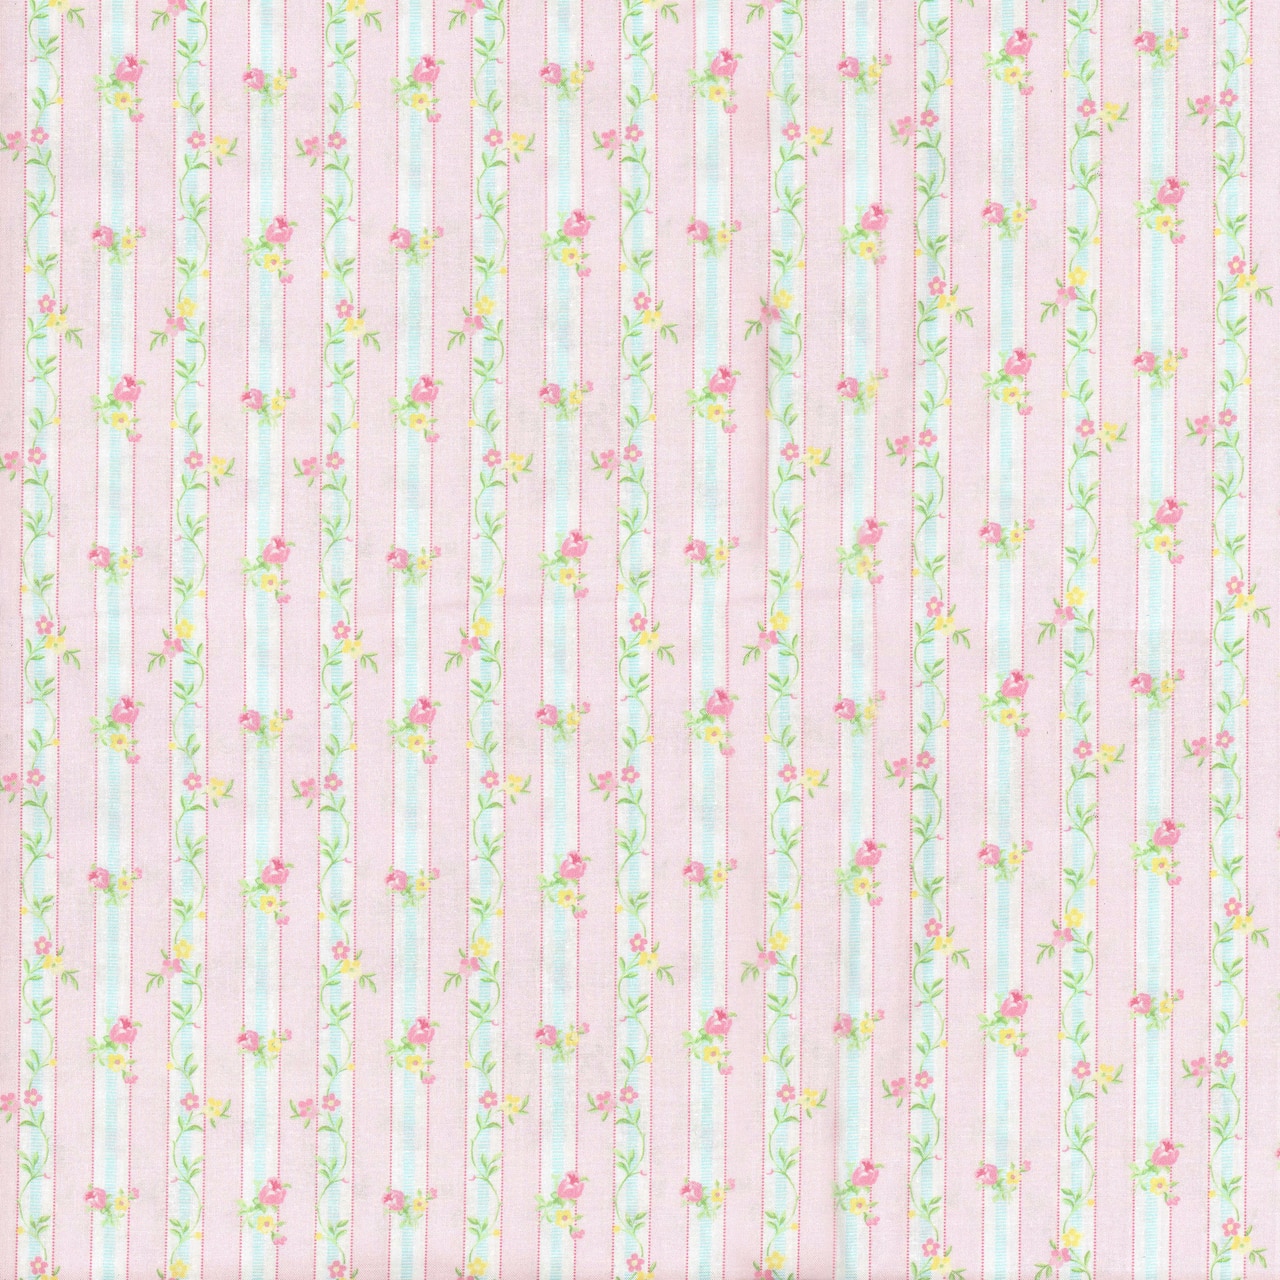 Fabric Traditions Floral Stripe Cotton Fabric